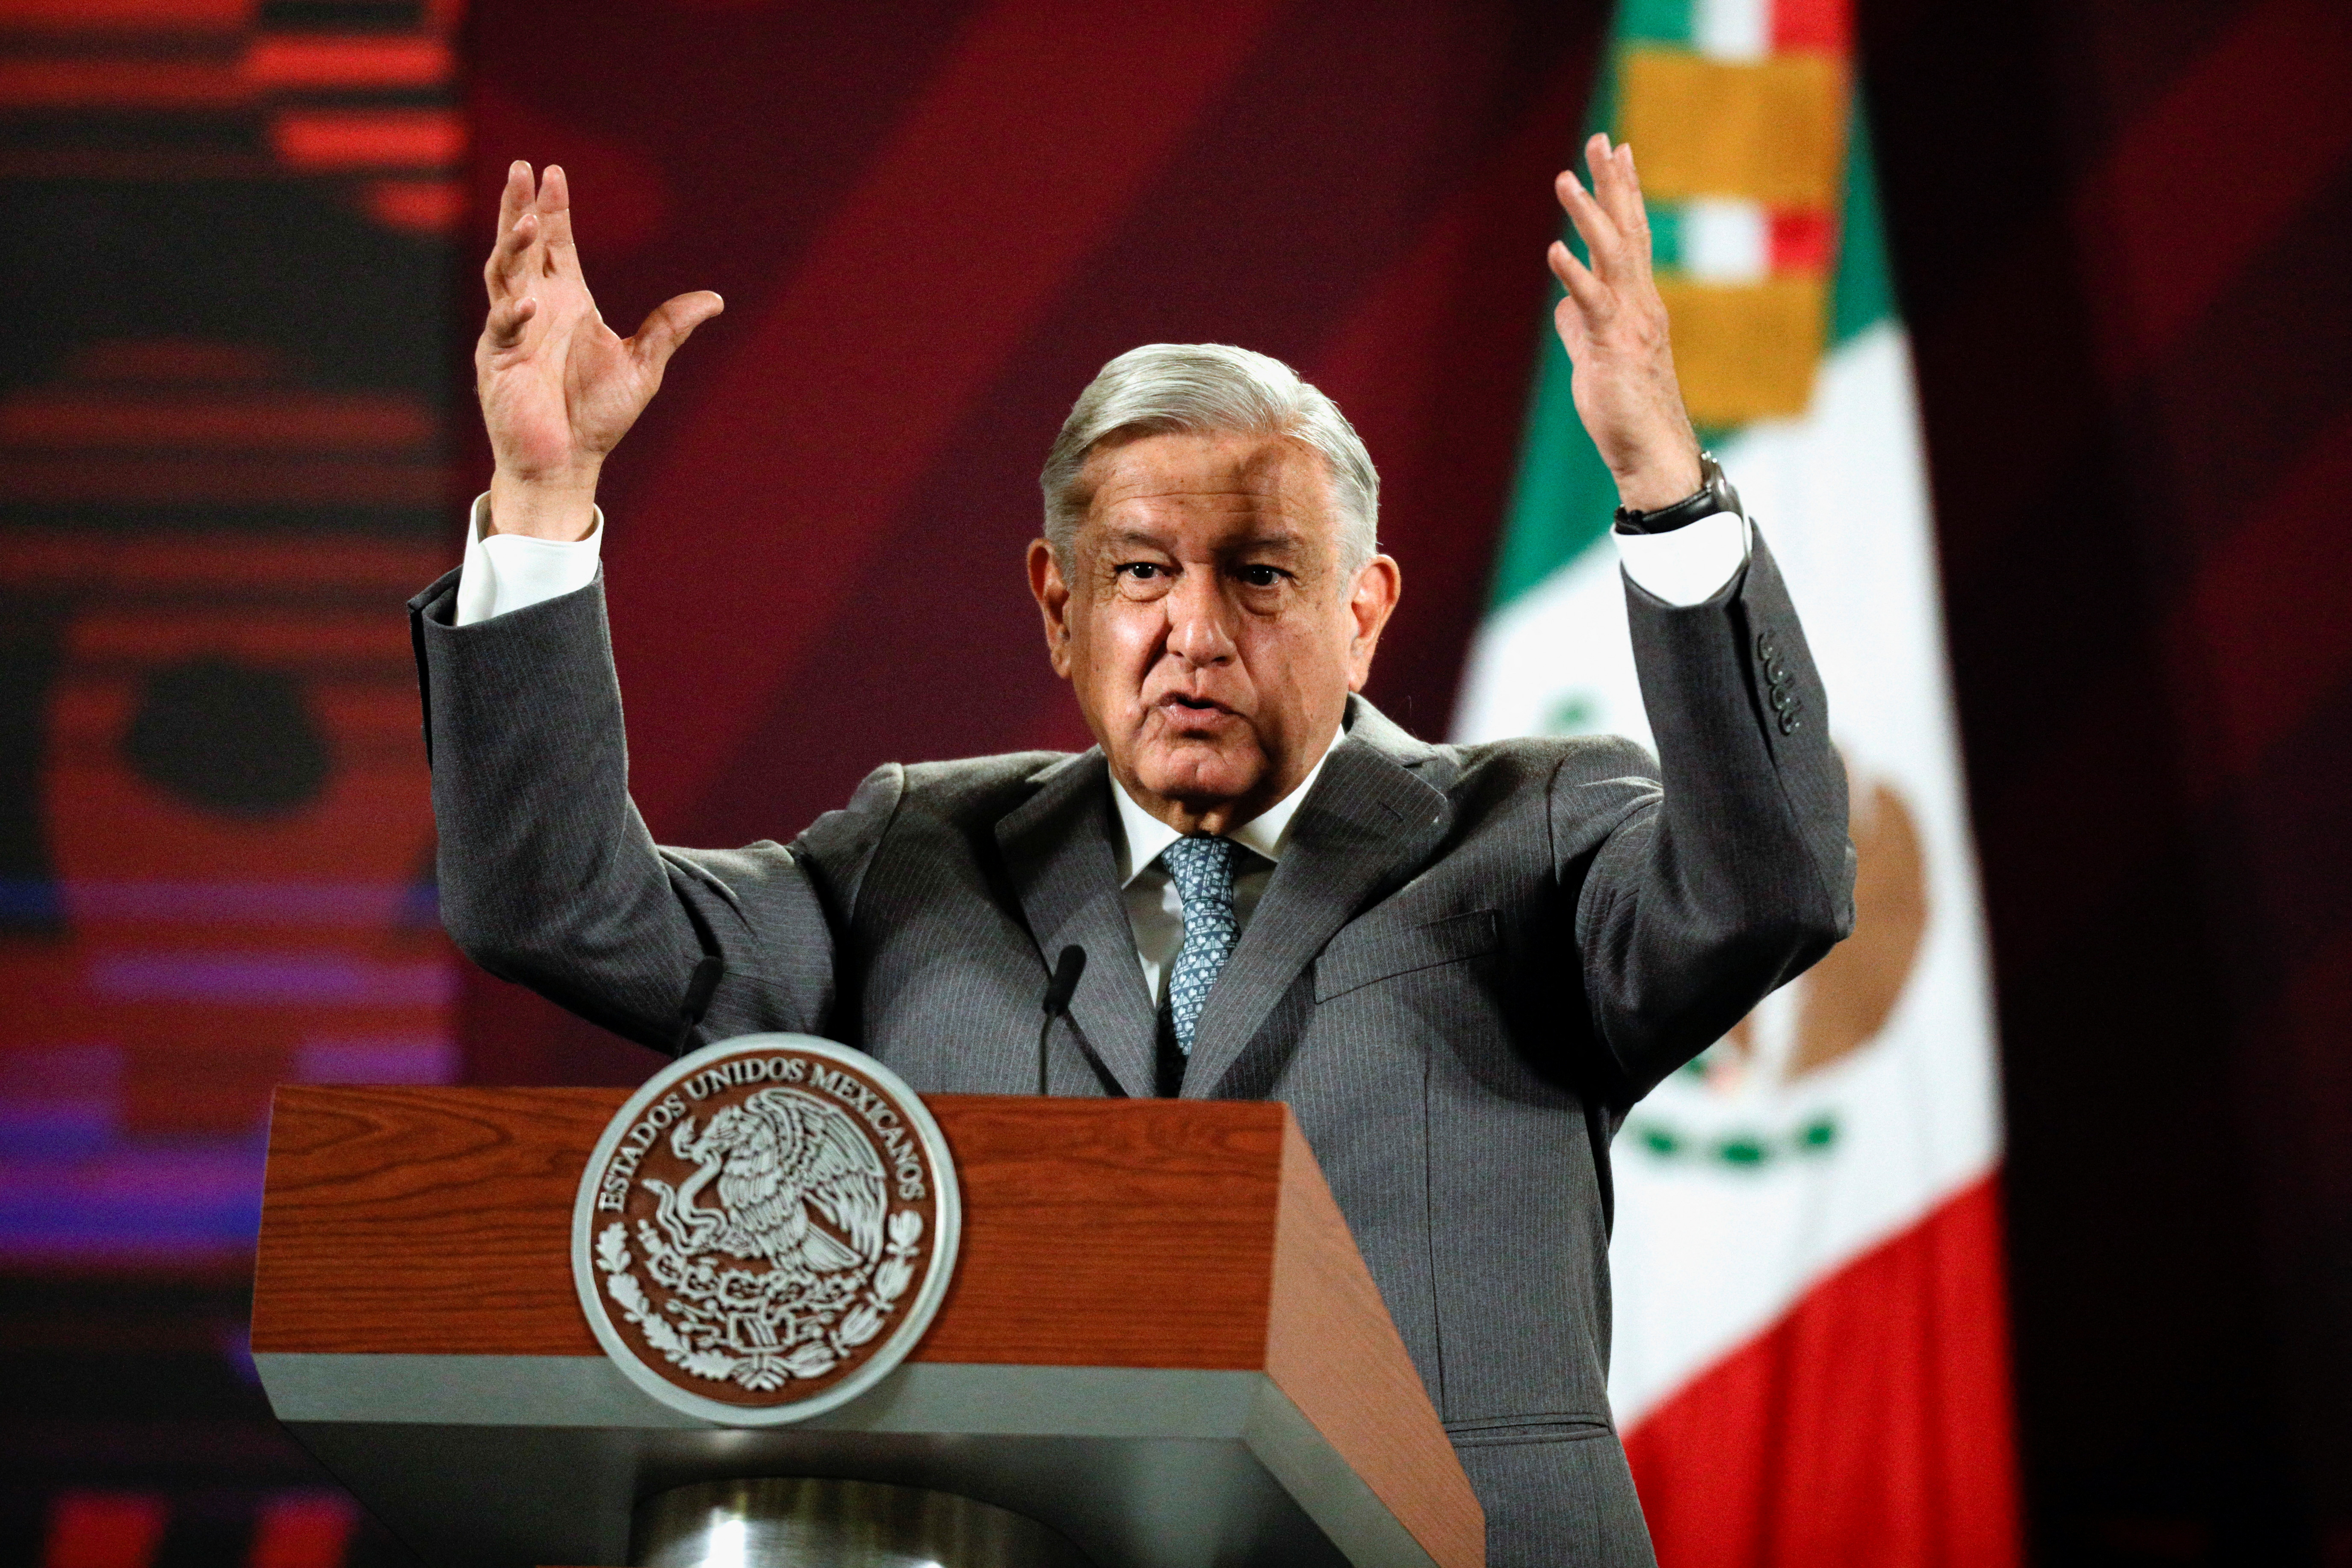 Mexican President Andres Manuel Lopez Obrador speaks during a news conference at the National Palace in Mexico City, Mexico March 7, 2023. REUTERS/Luis Cortes